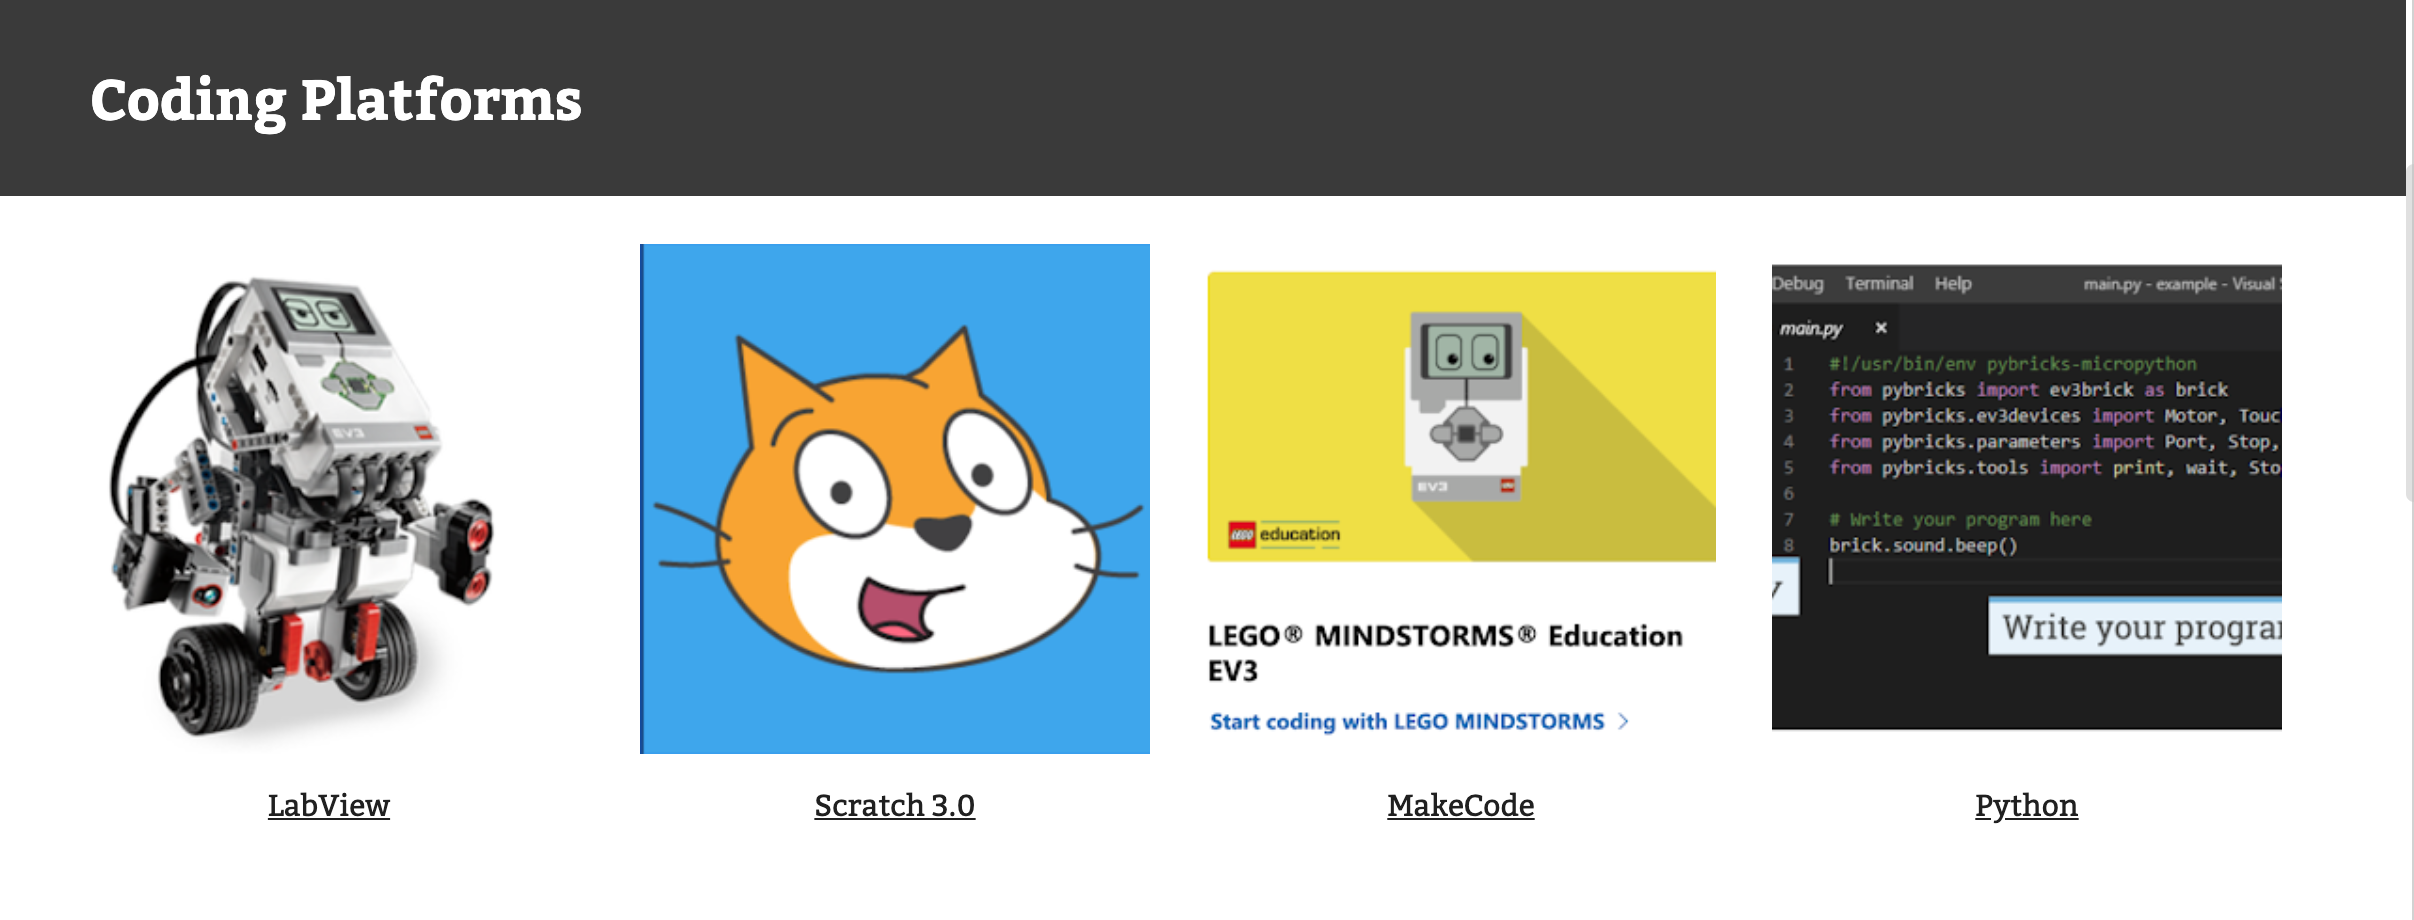 historie inaktive Tangle LEGO EV3 Labview vs MakeCode vs Scratch vs Python – Code Download Options |  Coffee For The Brain